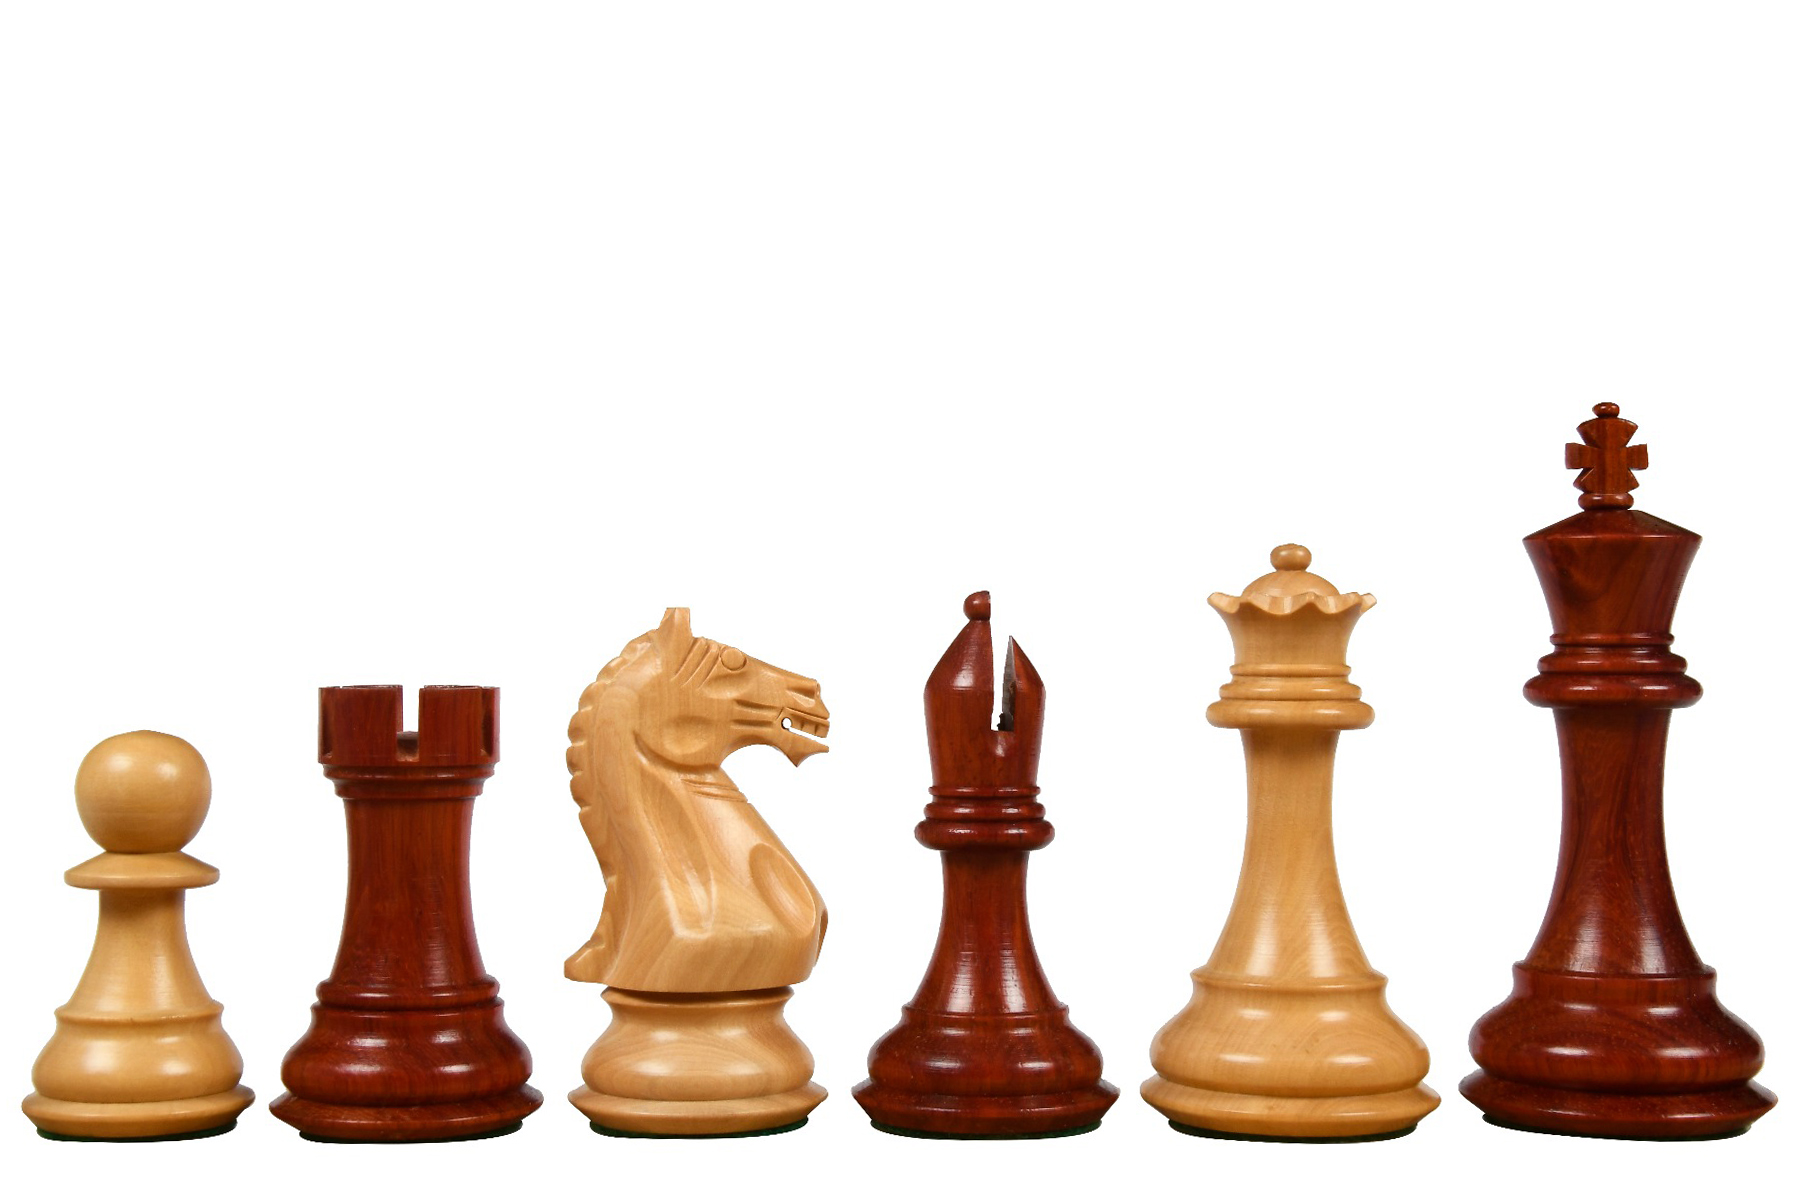 Fierce Knight Staunton Series Chess Pieces in Bud Rosewood & Box Wood - 4.0